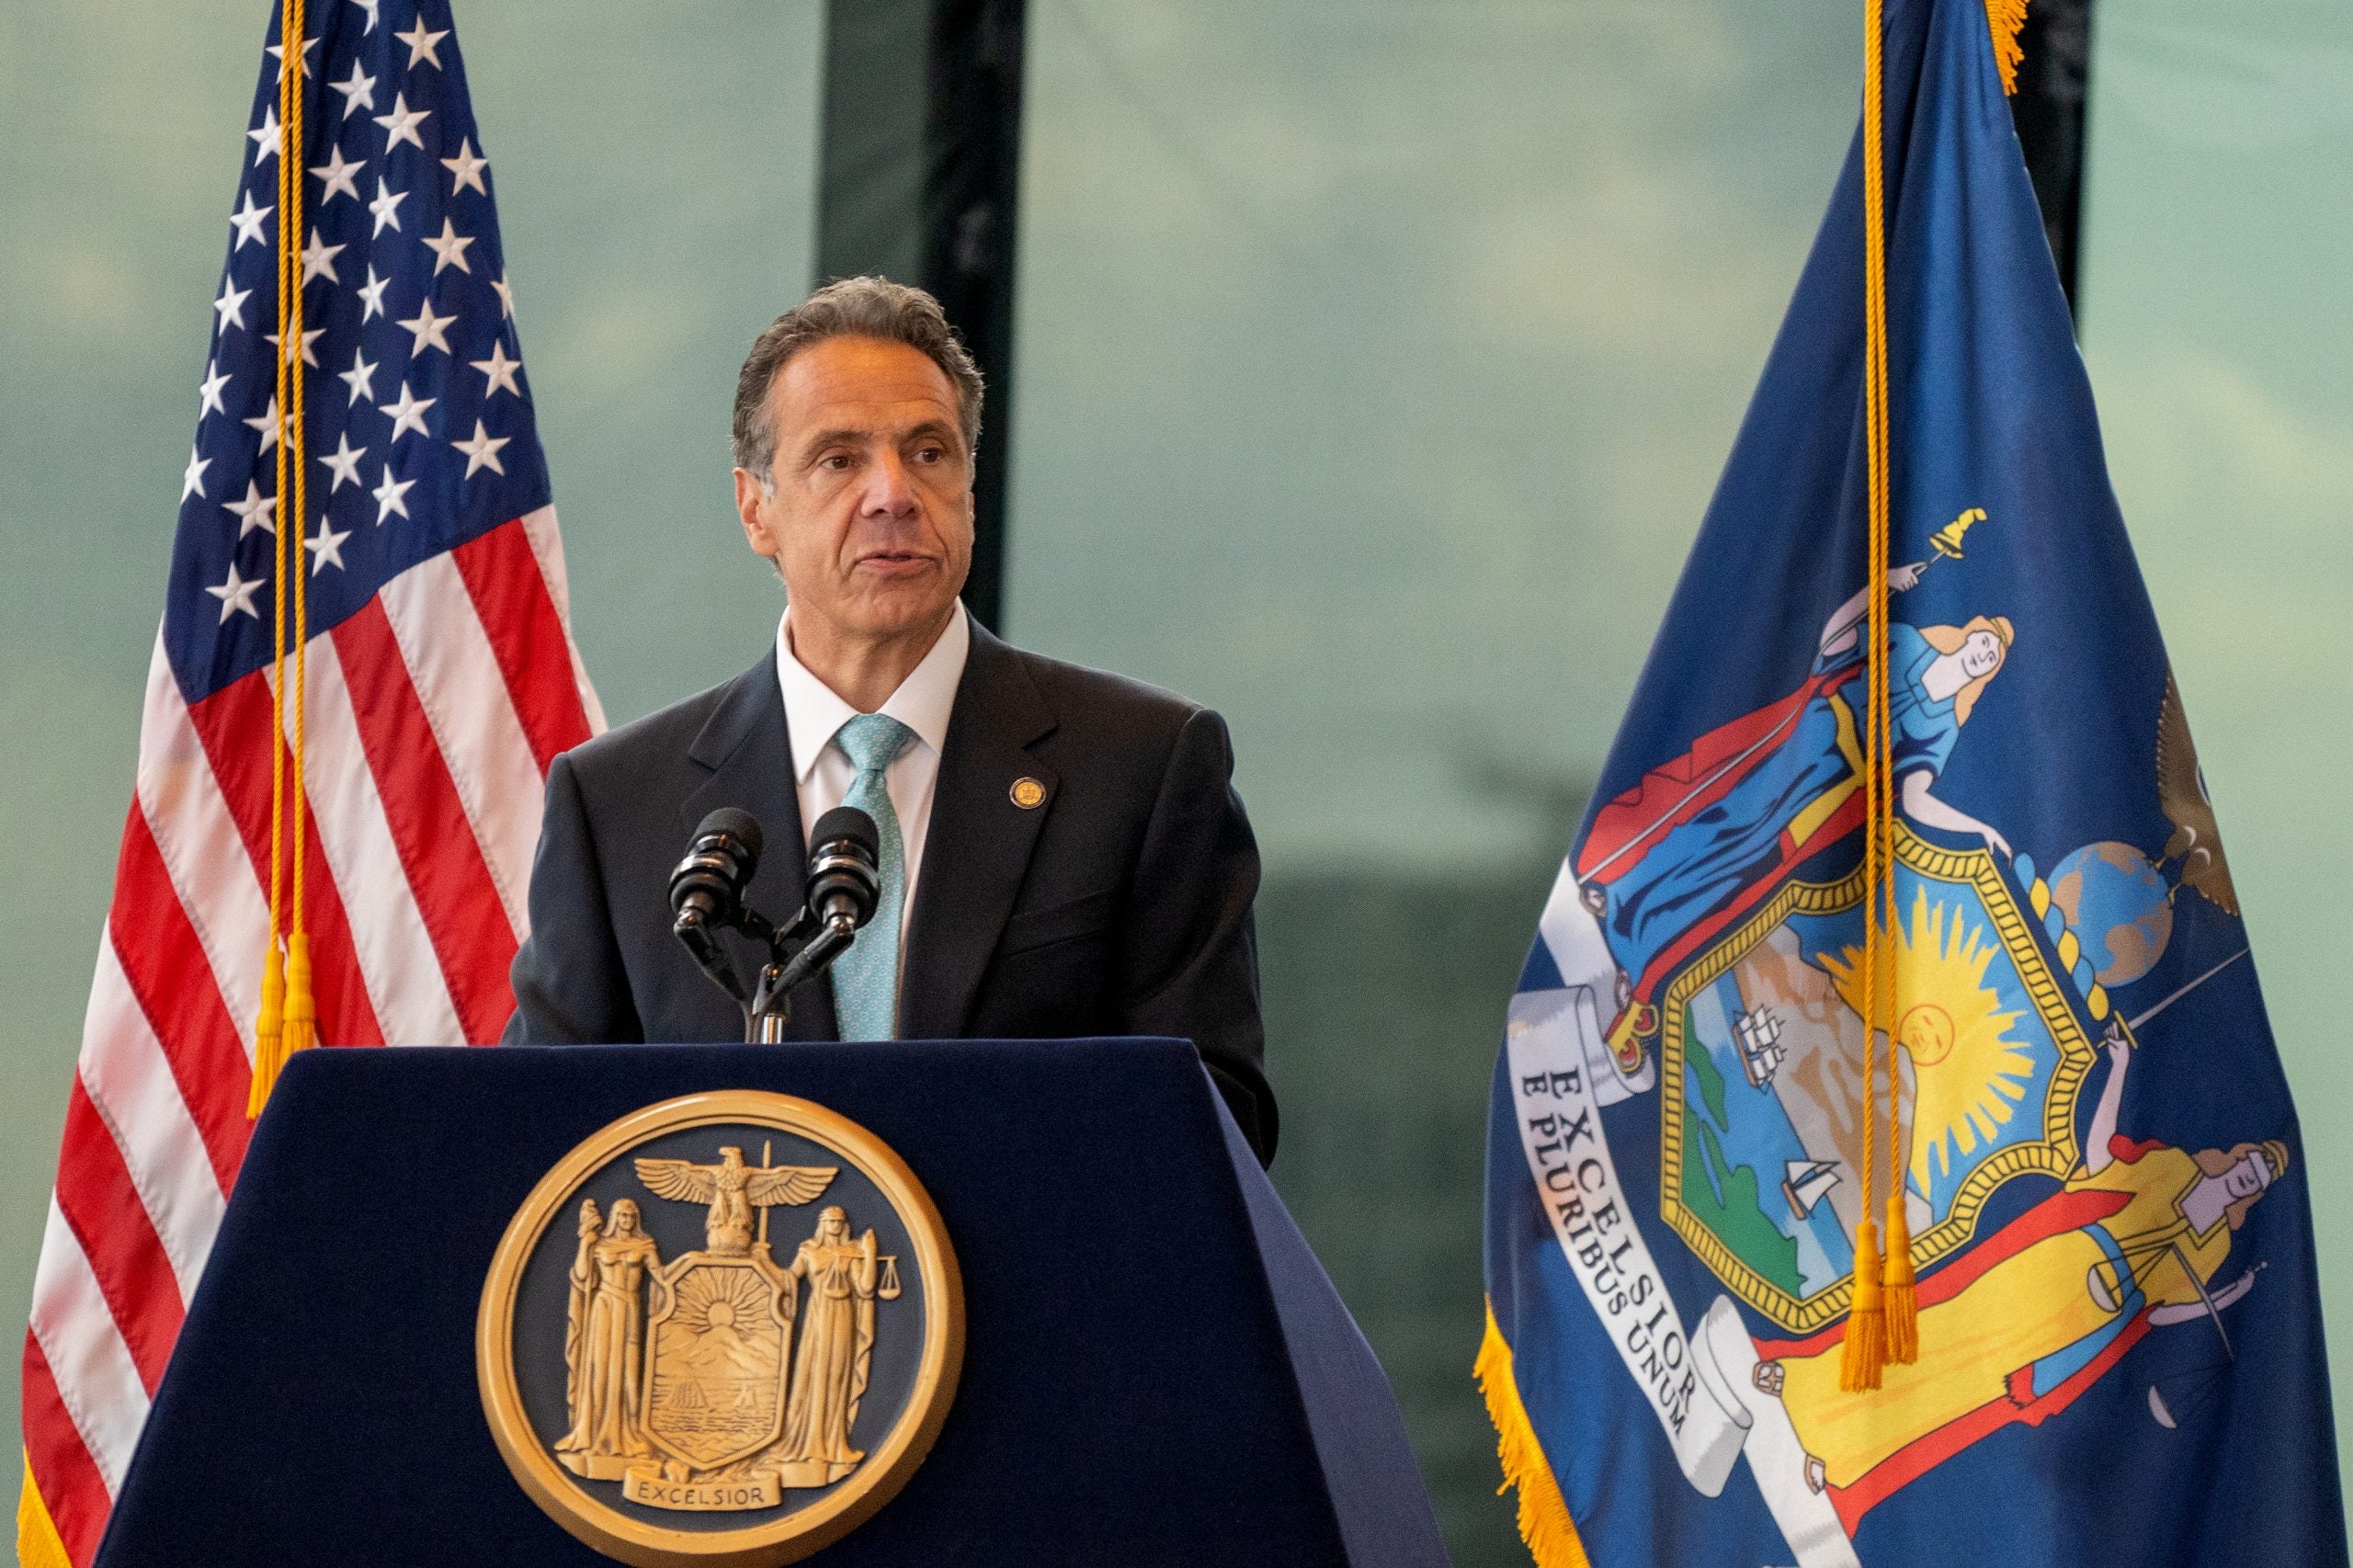 New York Governor Andrew Cuomo Sexually Harassed Multiple Women, State Investigation Finds